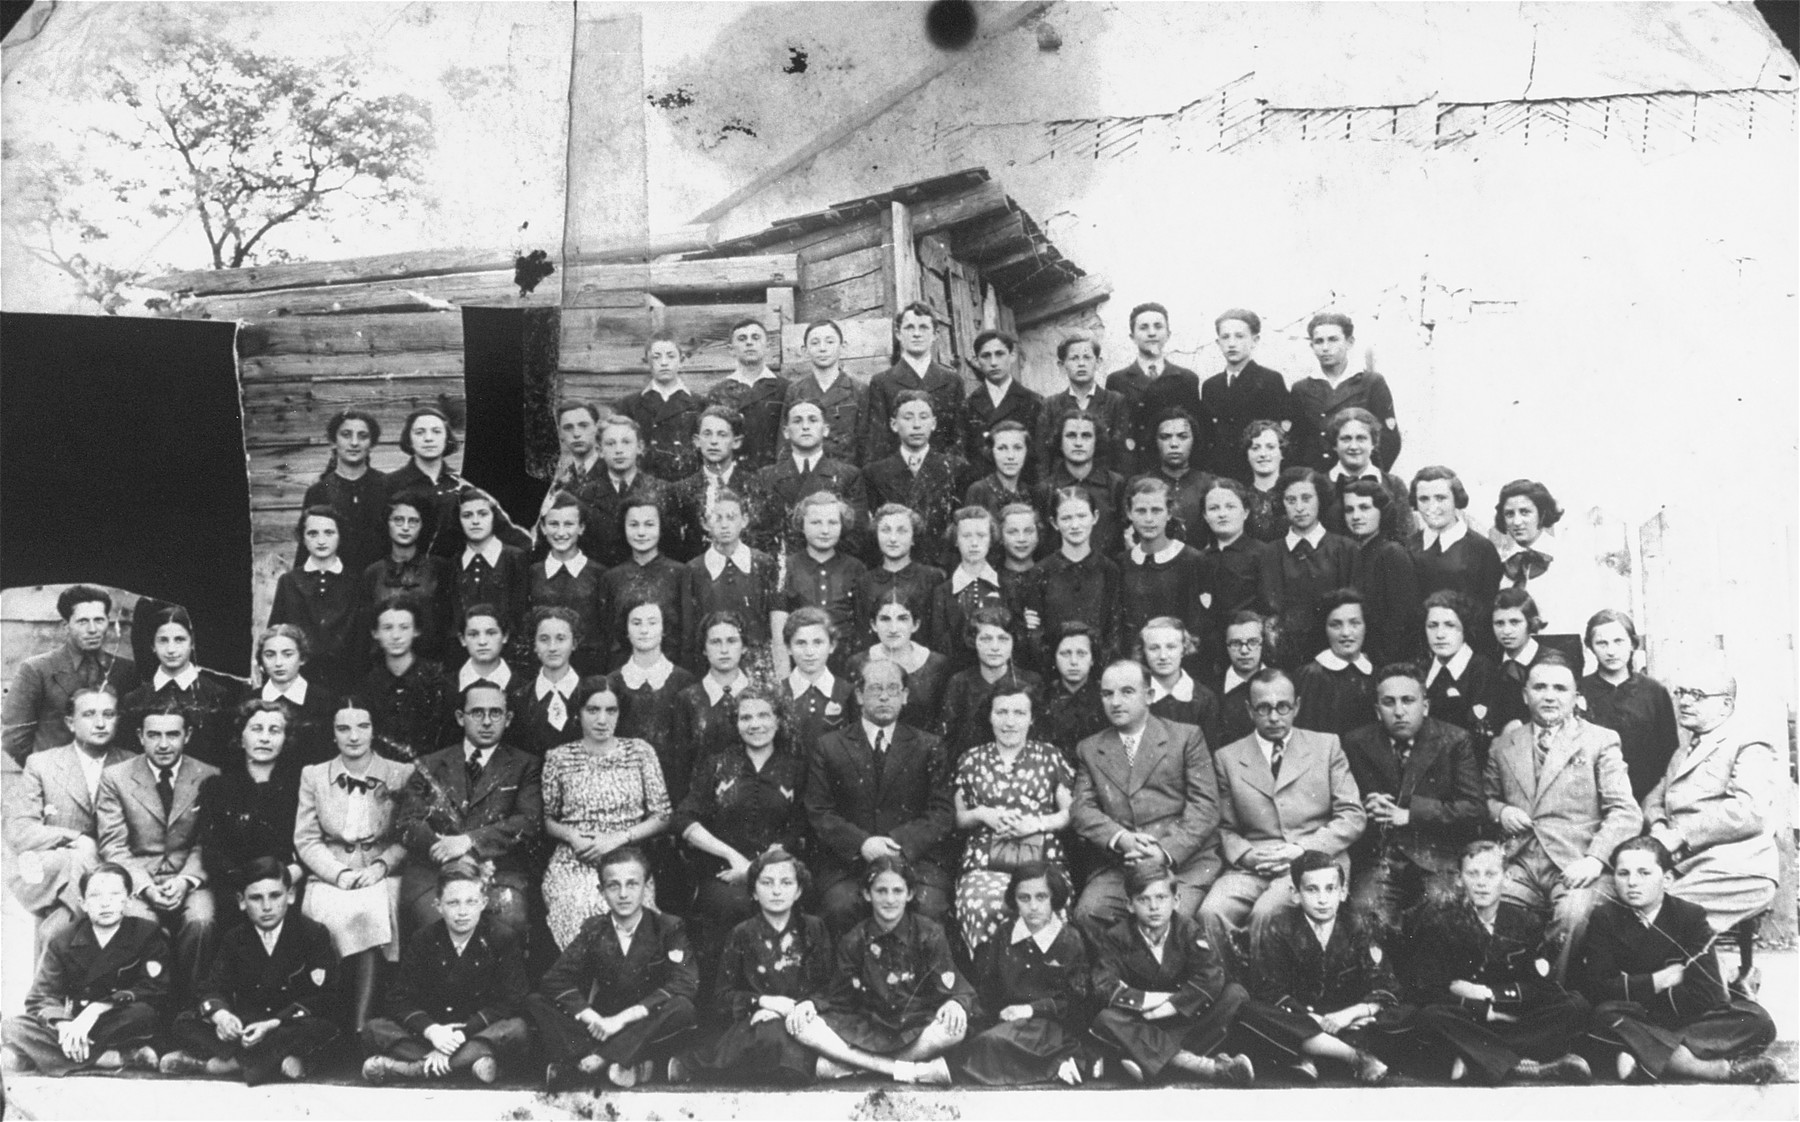 Group portrait of the faculty and students of the Hebrew gymnasium in Czortkow.

Bronia Wasserman is on the far left of the fifth row.  Her sister Zosia Wasserman is in the third row, 11th from the left.